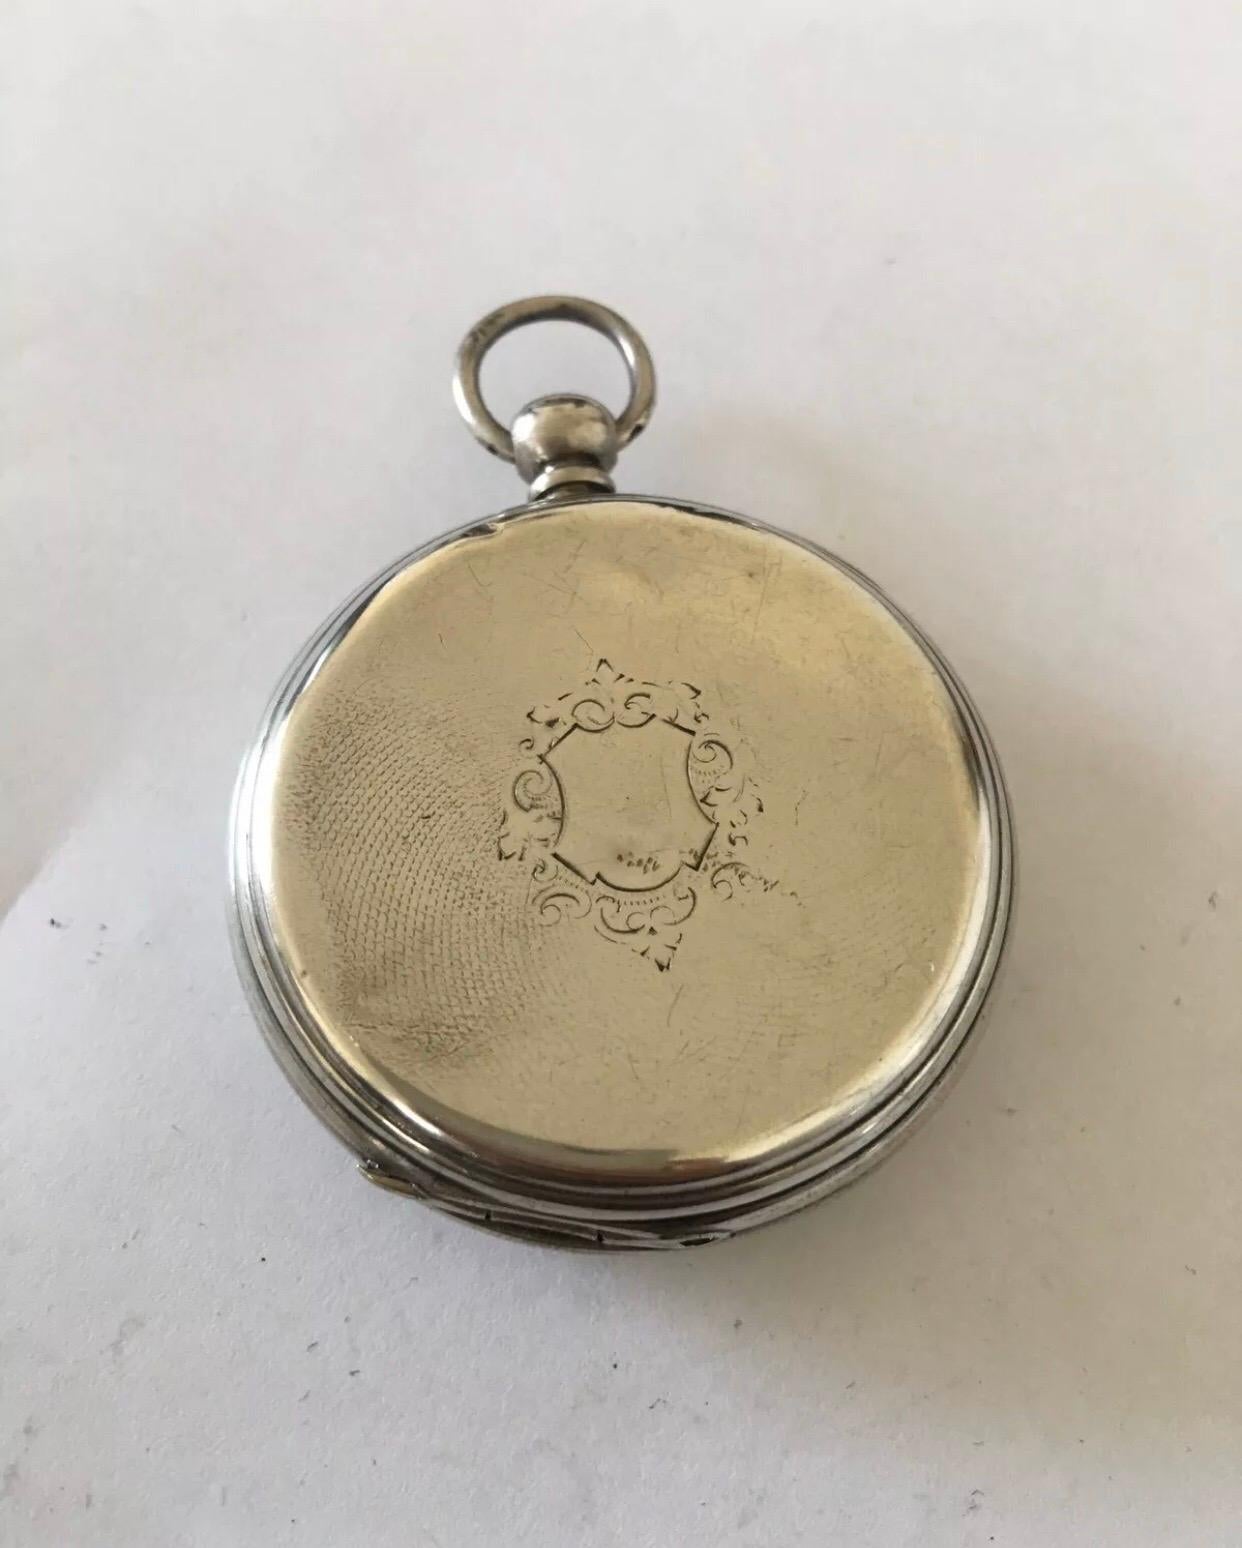 This beautiful antique silver pocket watch is working and ticking well. Visible dents on the silver case back cover as shown.

Please study the images carefully as form part of the description.